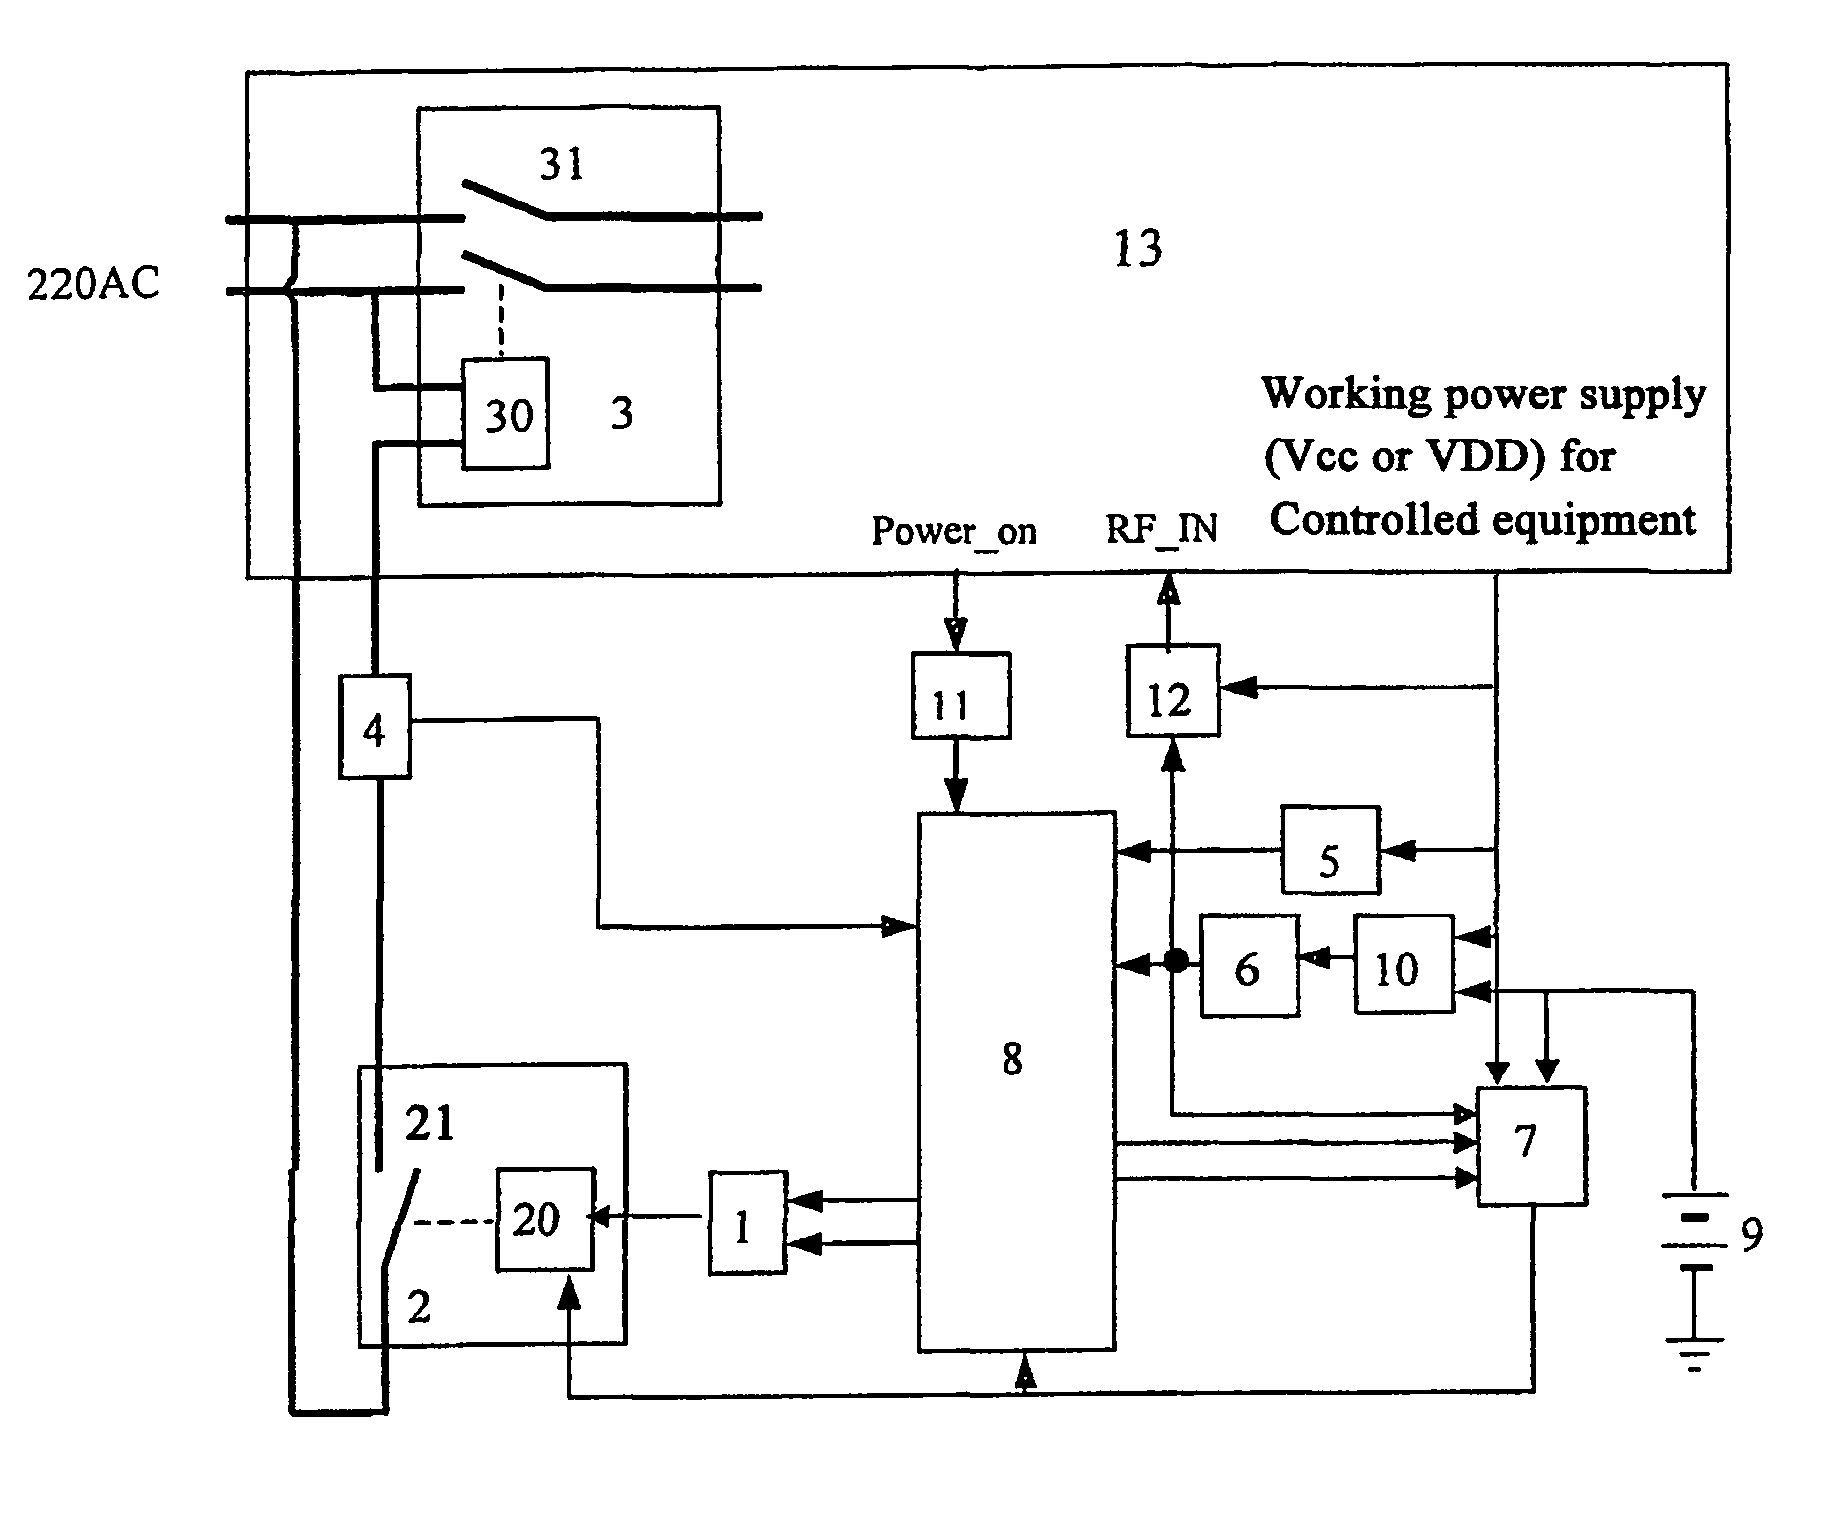 Control device for a power supply with zero power consumption in standby mode